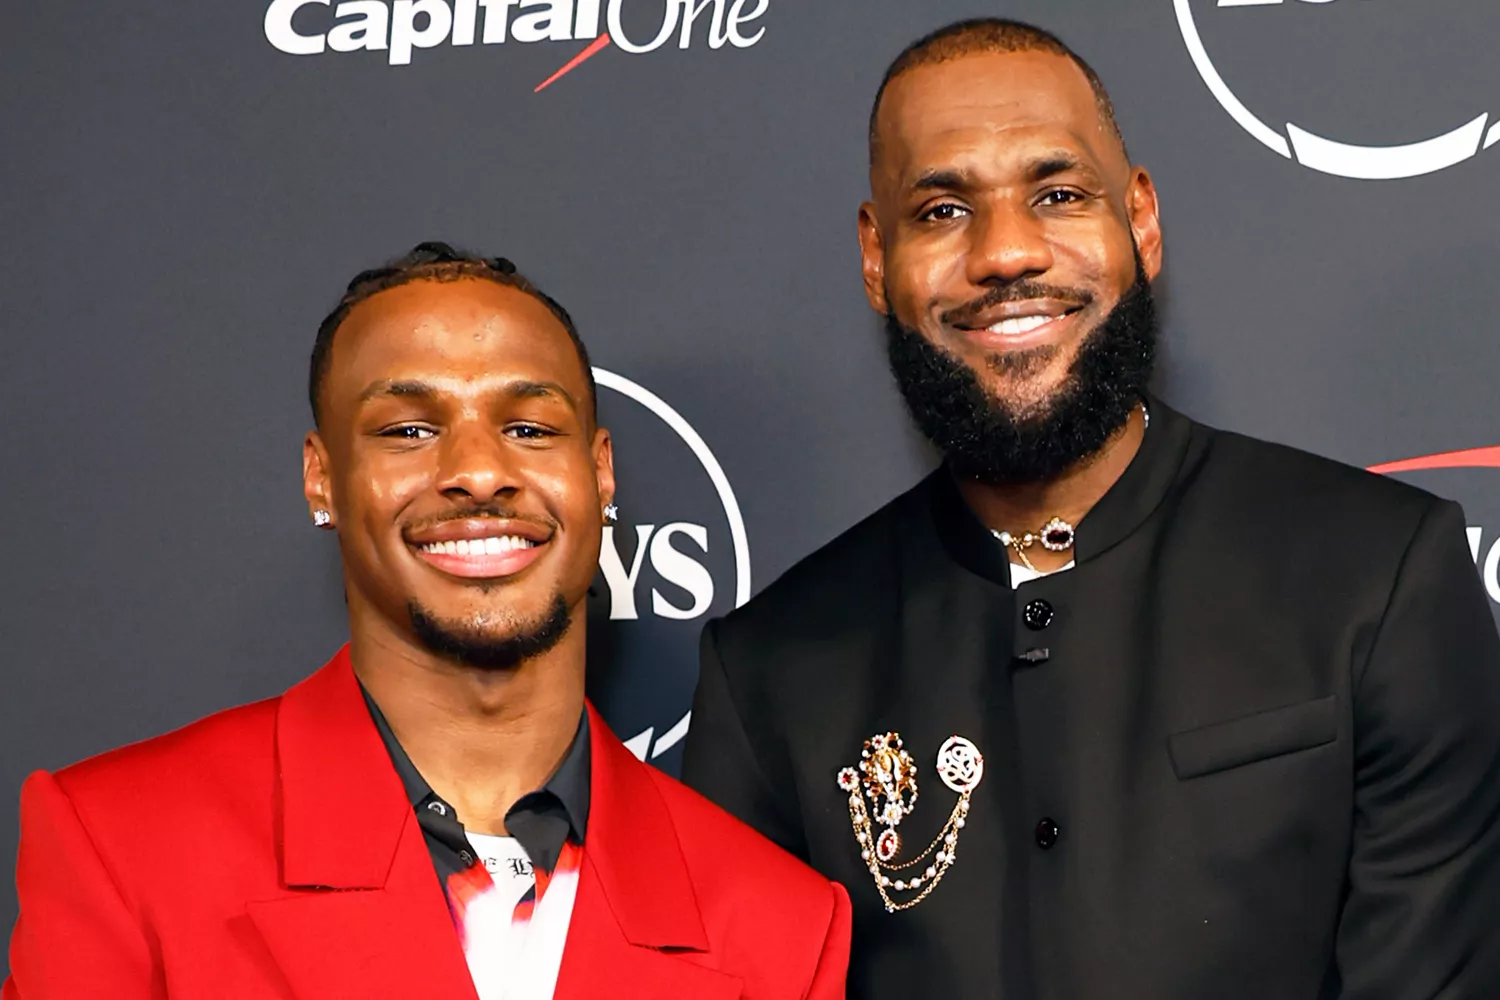 Bronny James and LeBron James attend the 2023 ESPY Awards in Hollywood, California